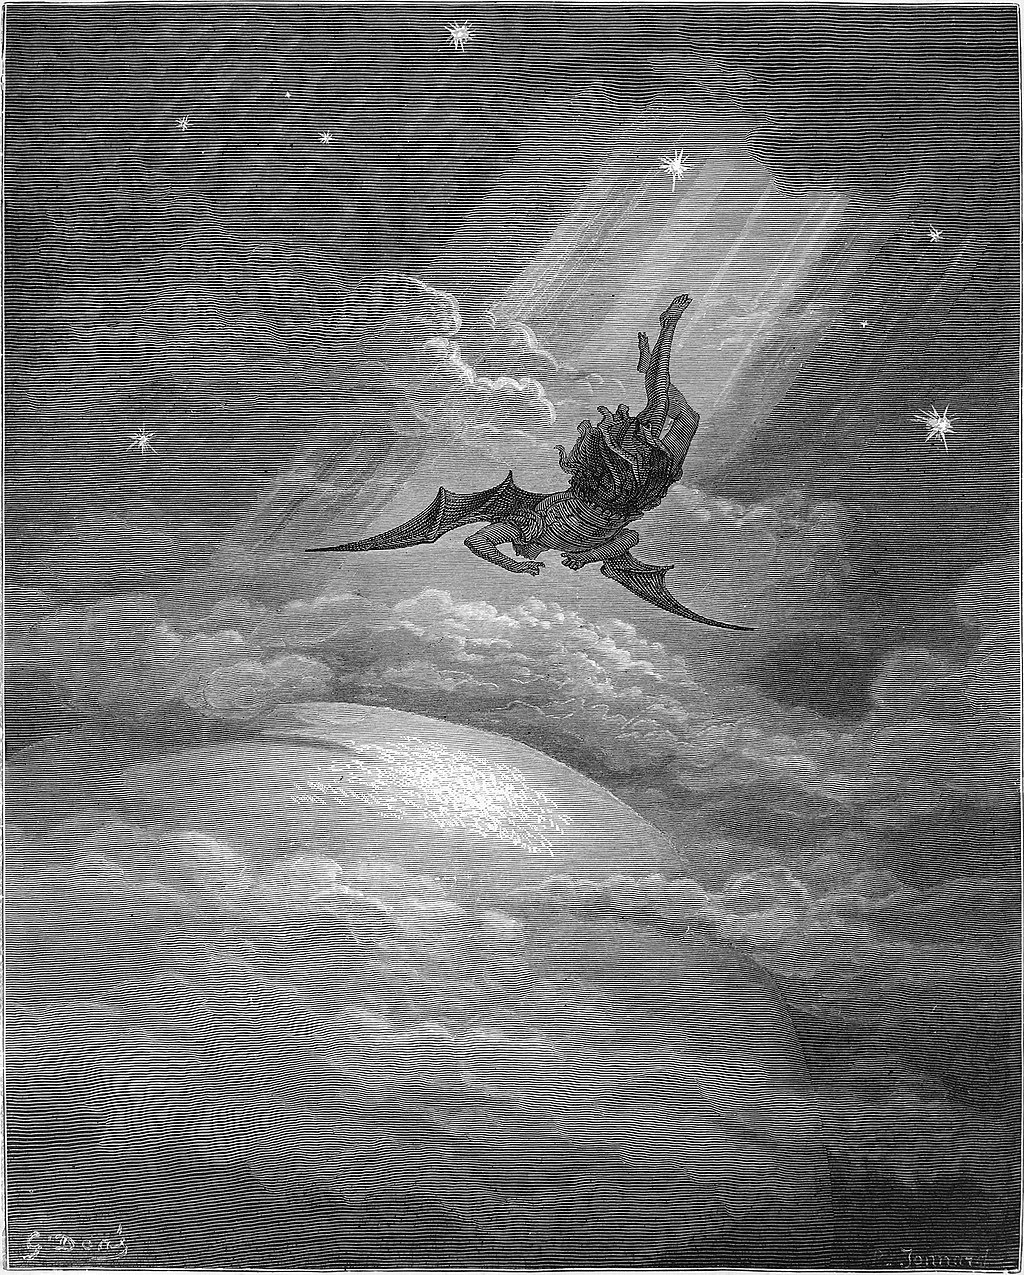 A black and white illustration of a man flying in the sky.